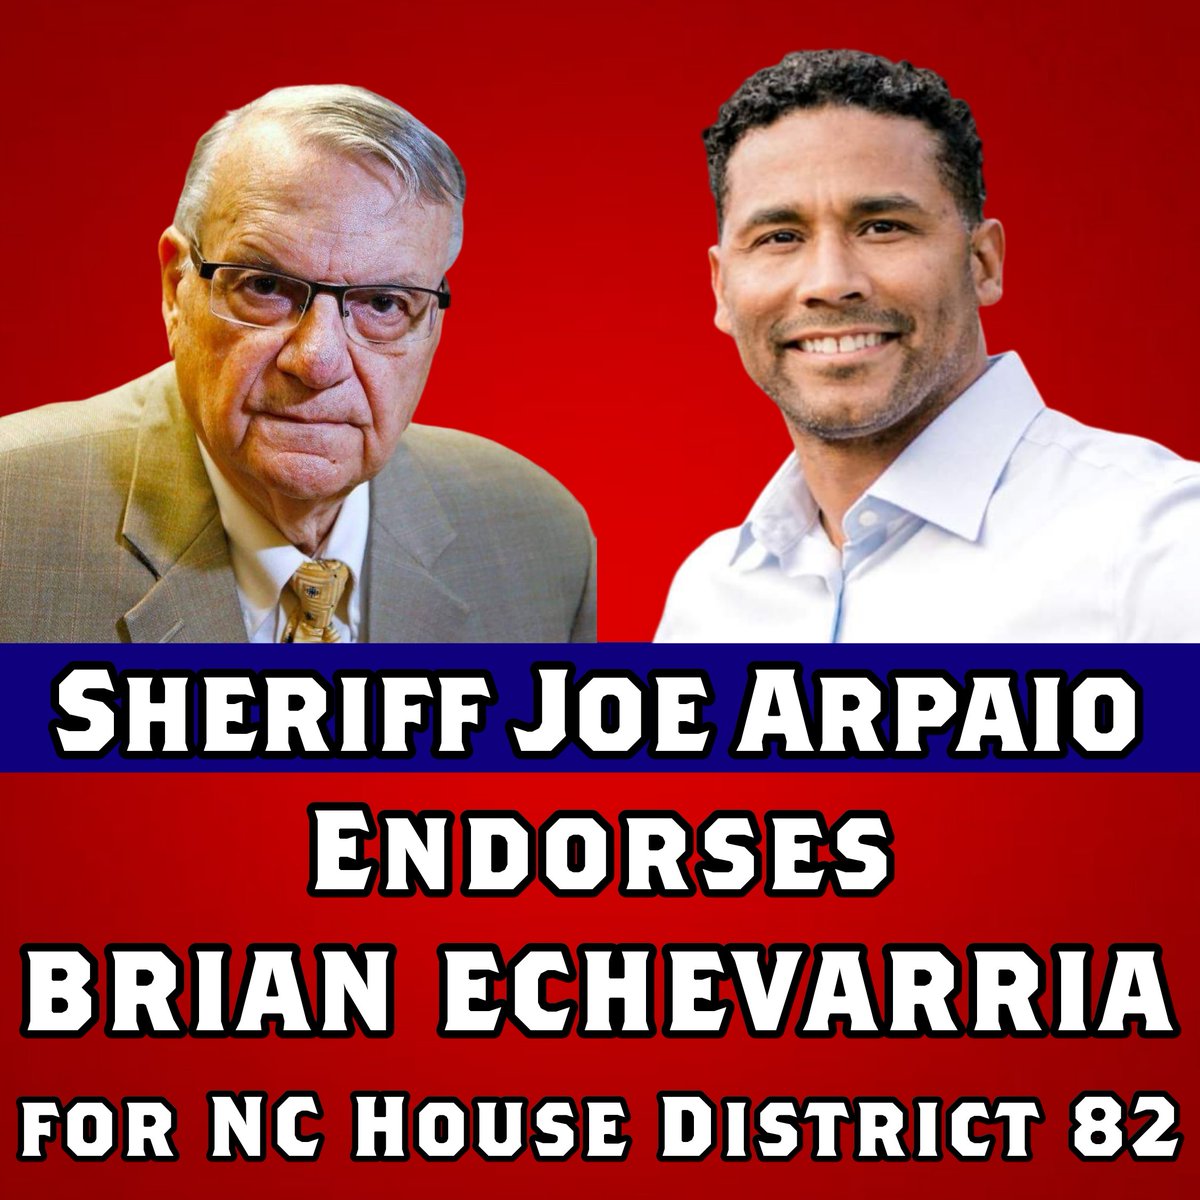 As the North Carolina primary election is being held on March 5th, I extend my endorsement to Brian Echevarria for House District 82. I encourage all Americans to vote for pro-Trump conservative candidates like Brian.